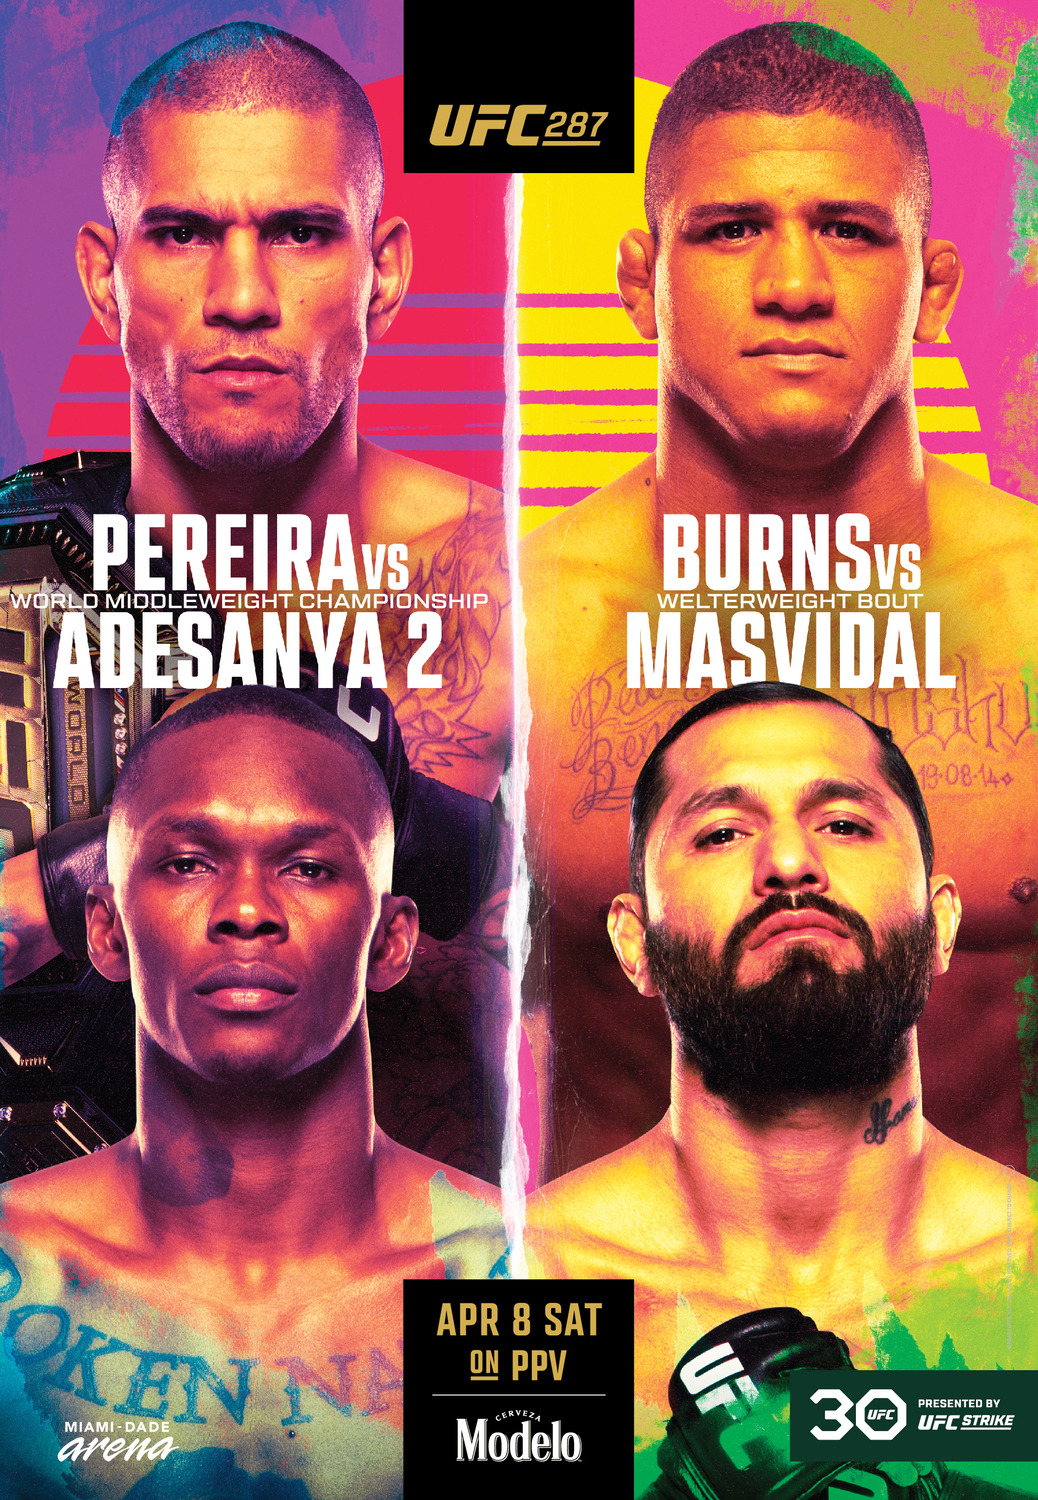 Extra Large TV Poster Image for UFC 287 